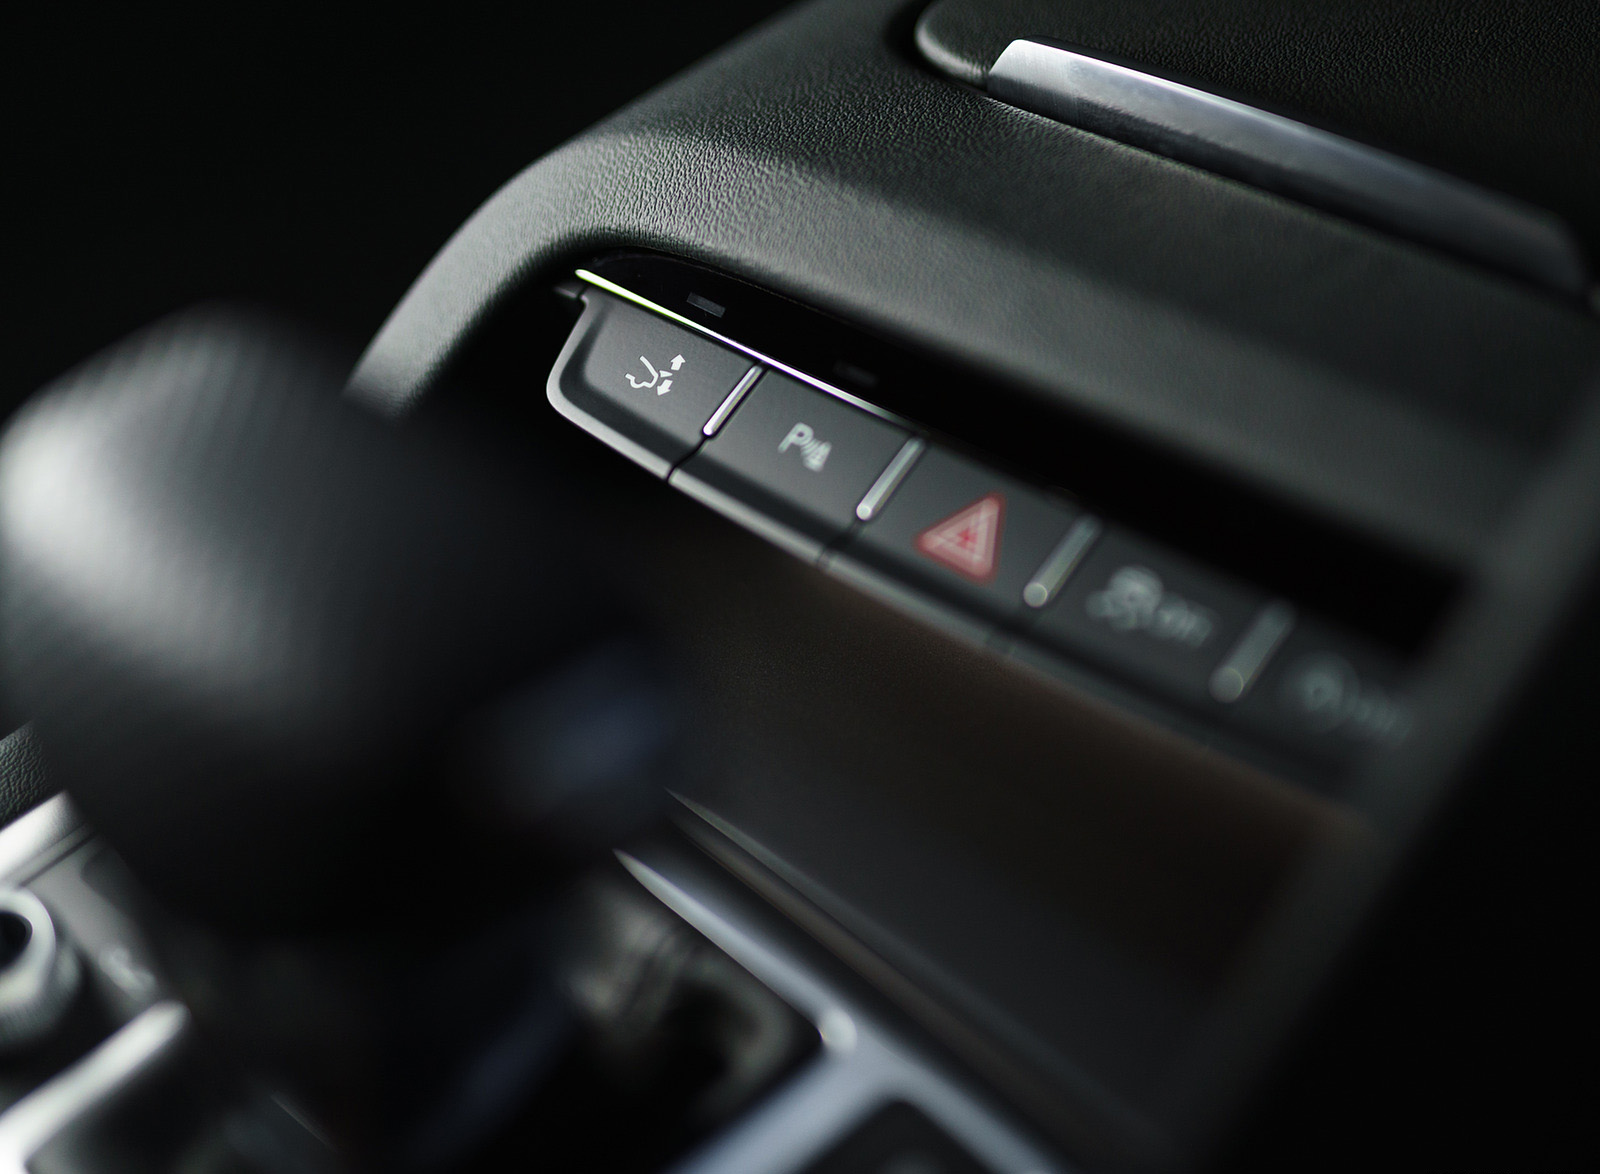 2020 Audi R8 V10 RWD Coupe (UK-Spec) Interior Detail Wallpapers #144 of 151